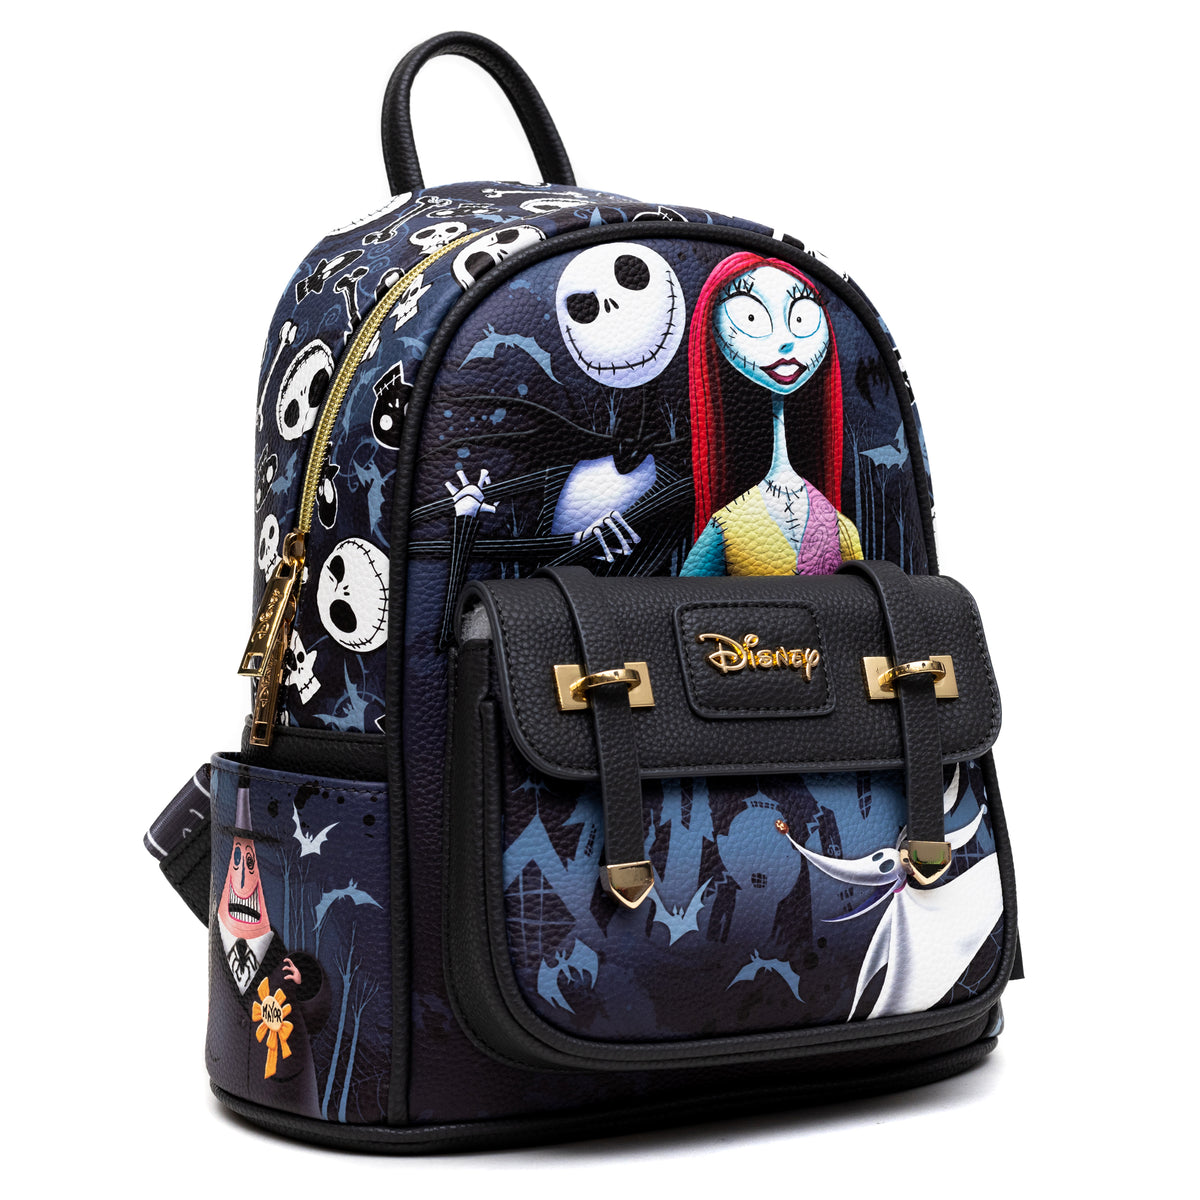 Nightmare Before Christmas Mini Backpack - Limited Edition